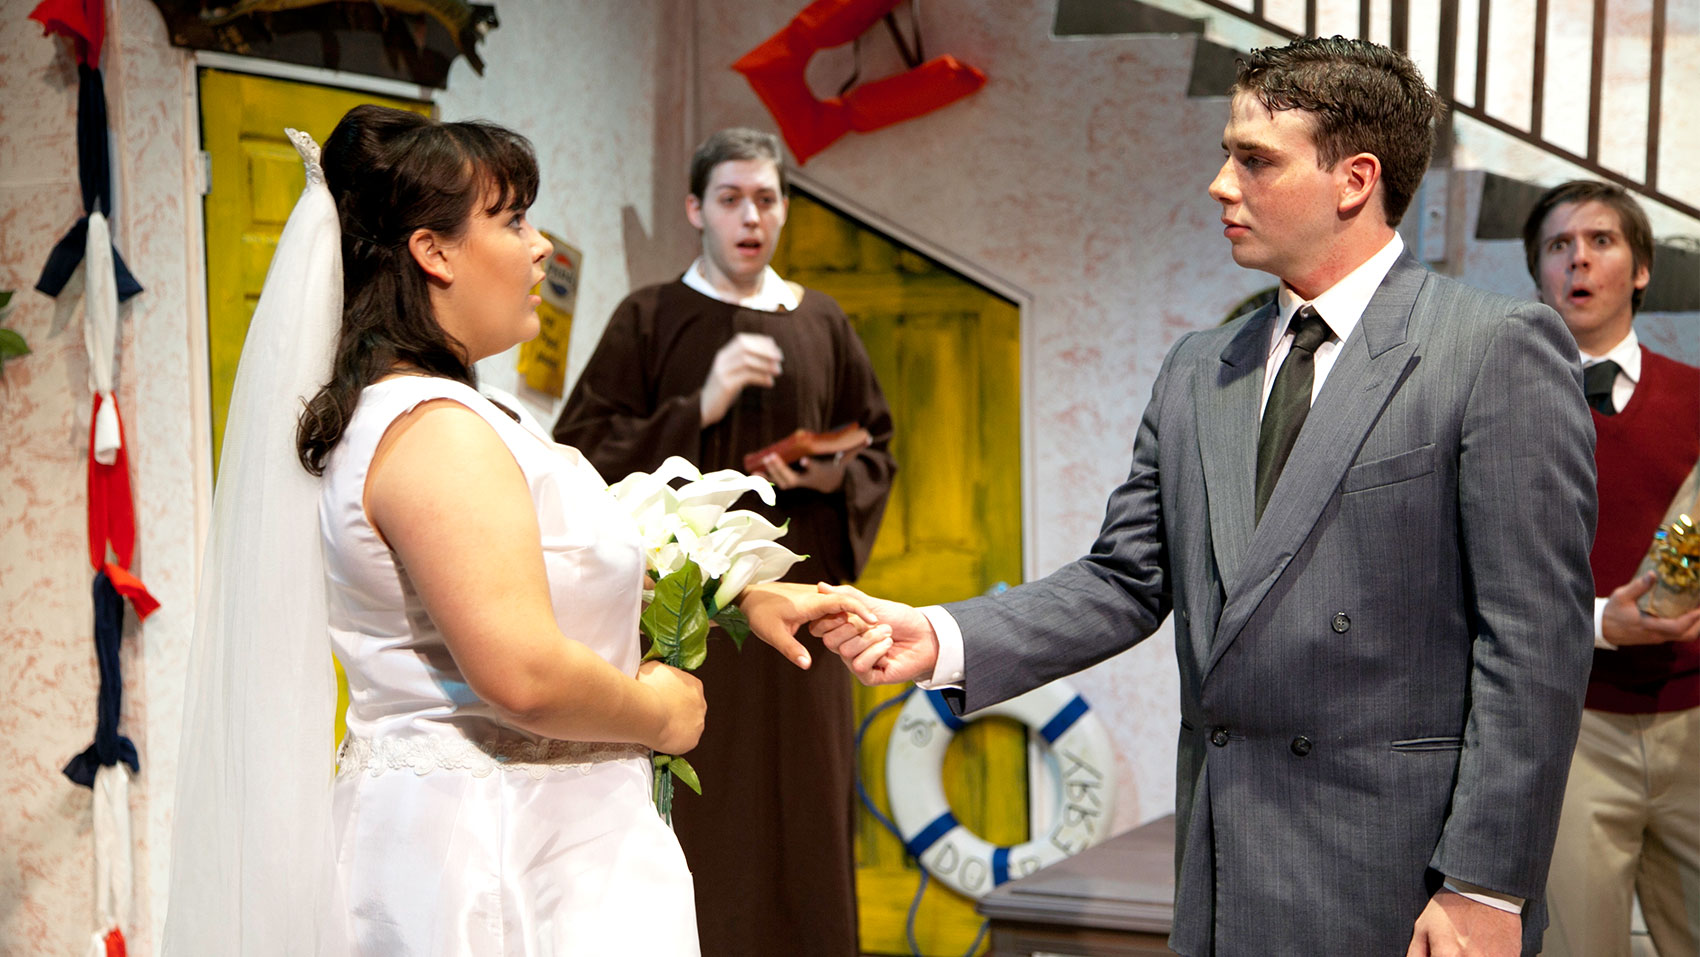 Two characters look on in shock while a man in a suit holds the hand of a woman in a wedding dress holding flowers, who also appears shocked. 